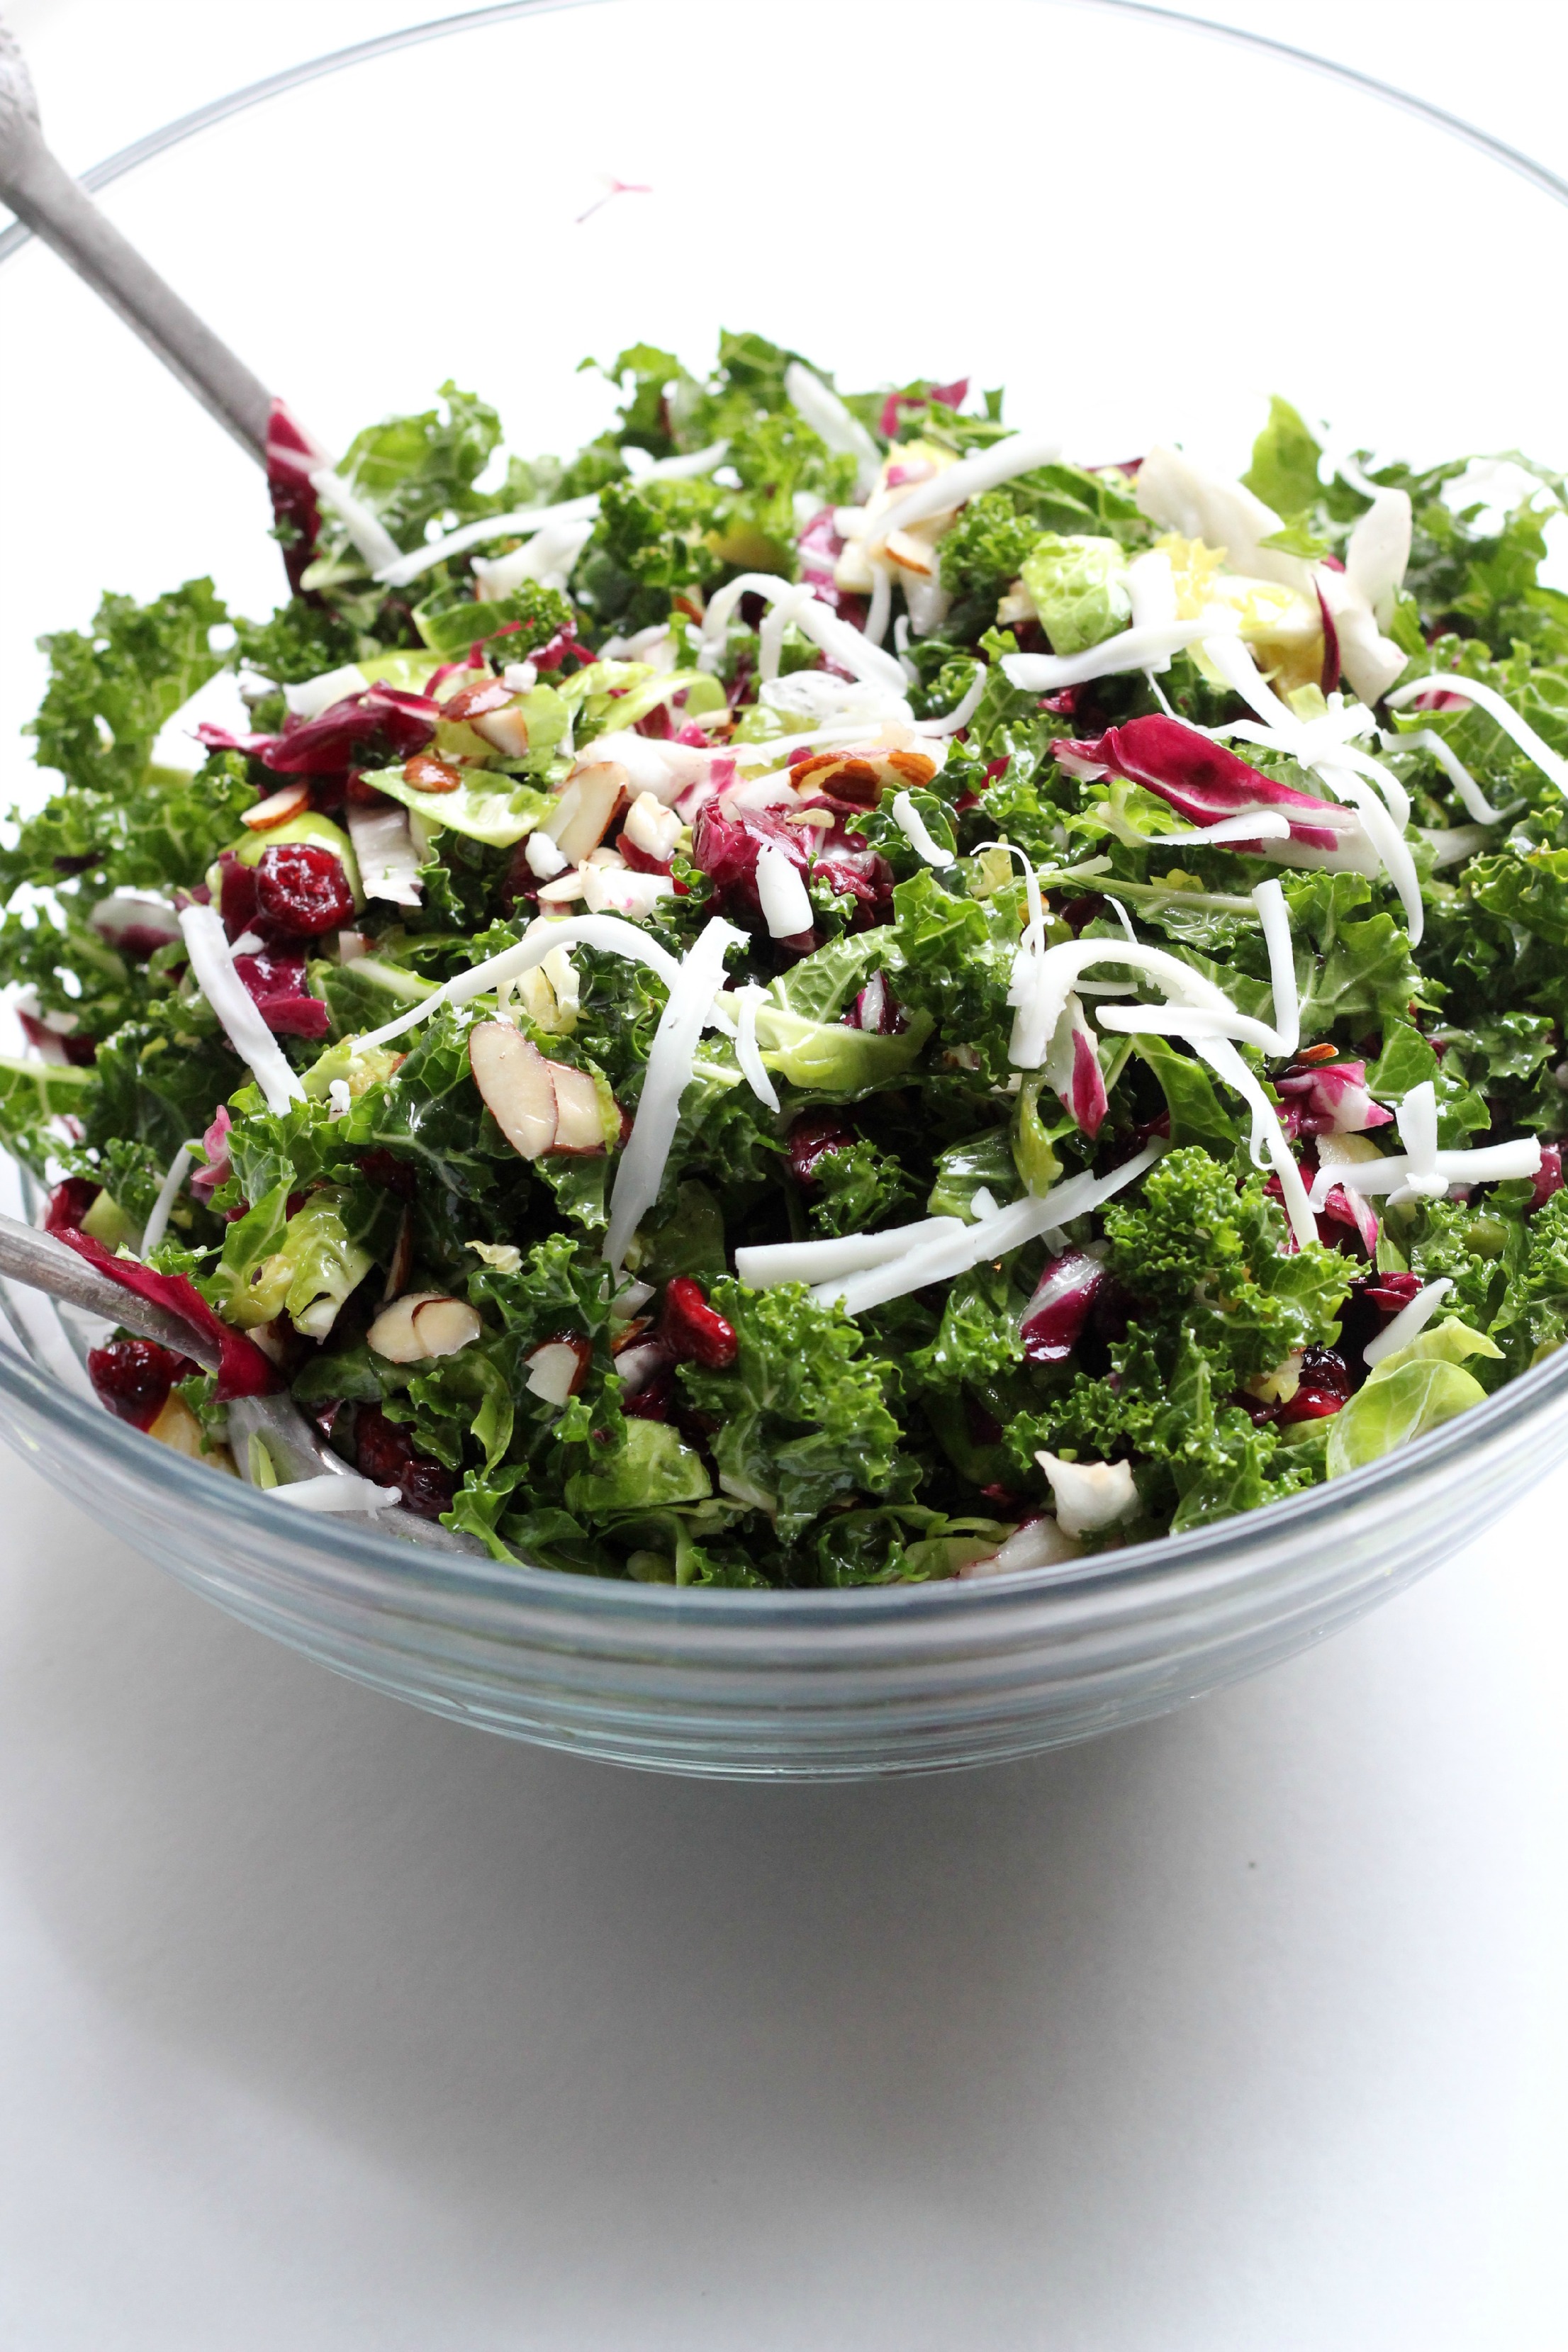 Paleo Mixed Green Salad with cranberries is AMAZING and perfect for food prep! 